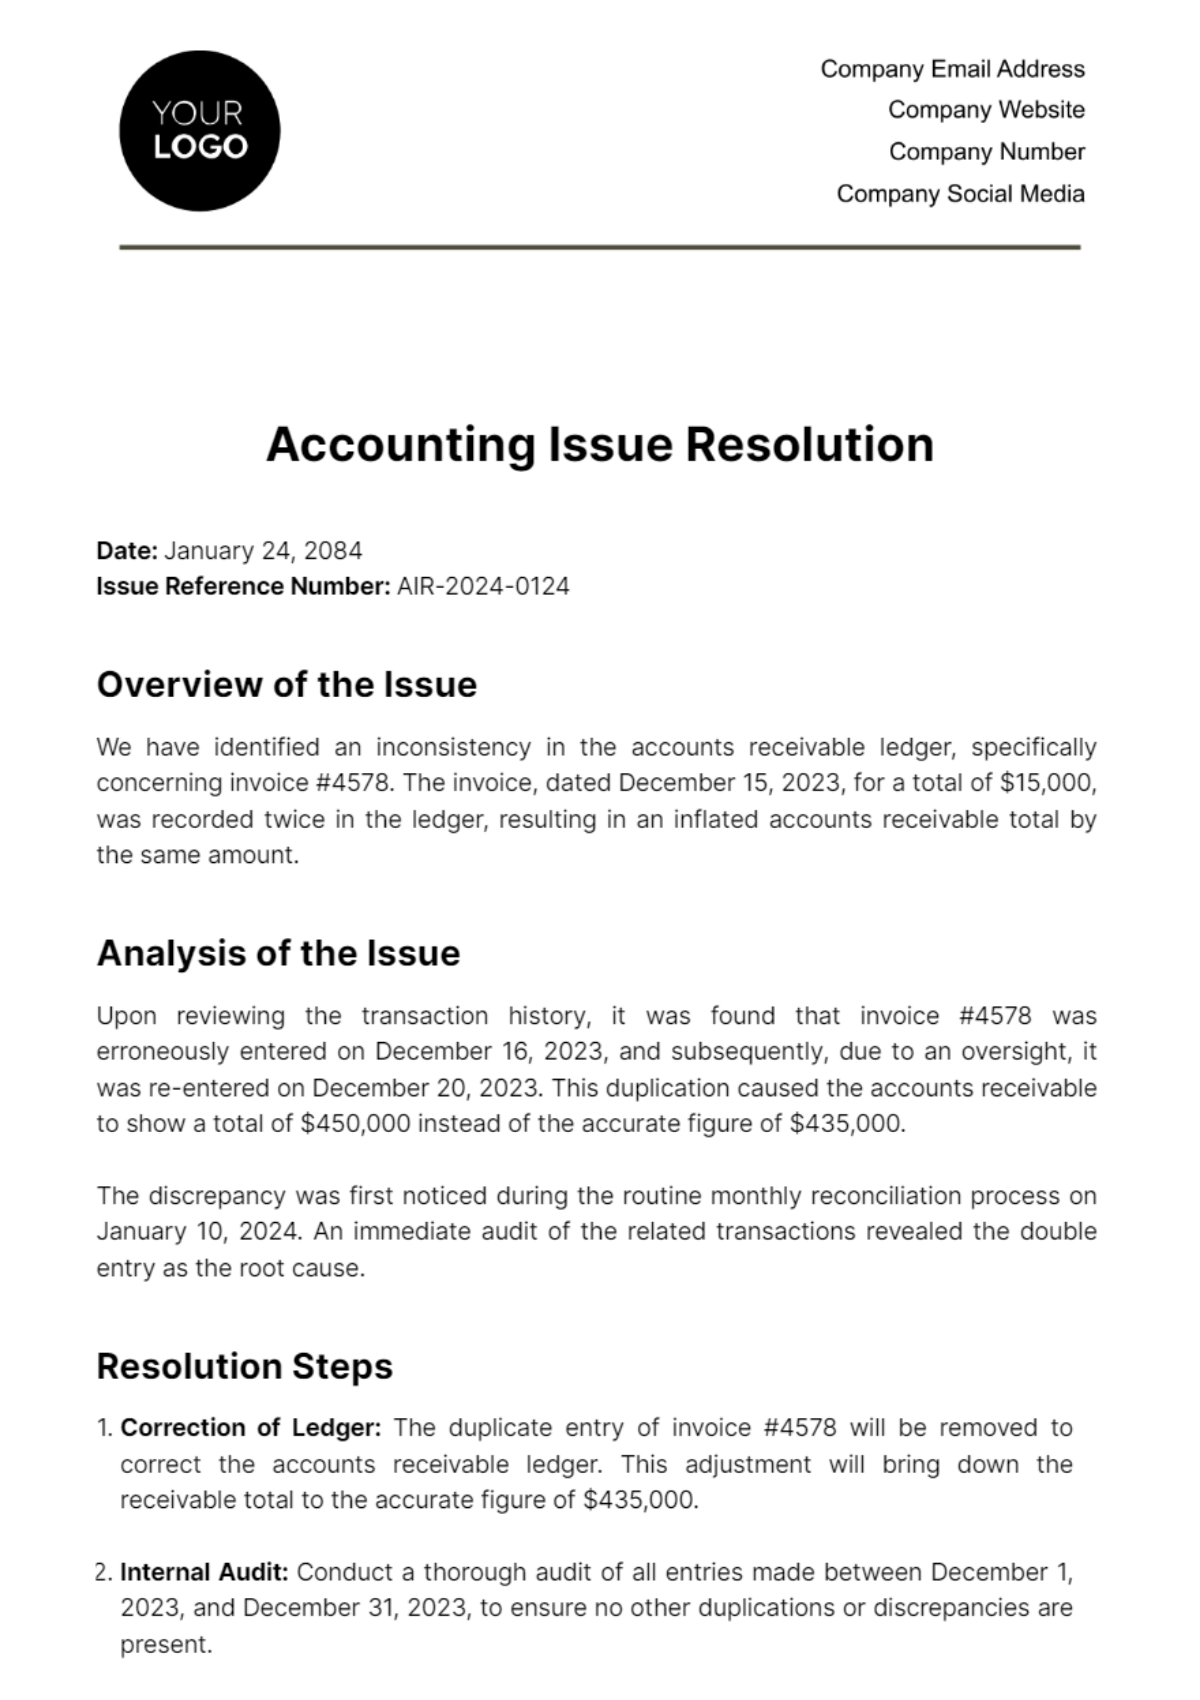 Accounting Issue Resolution Template